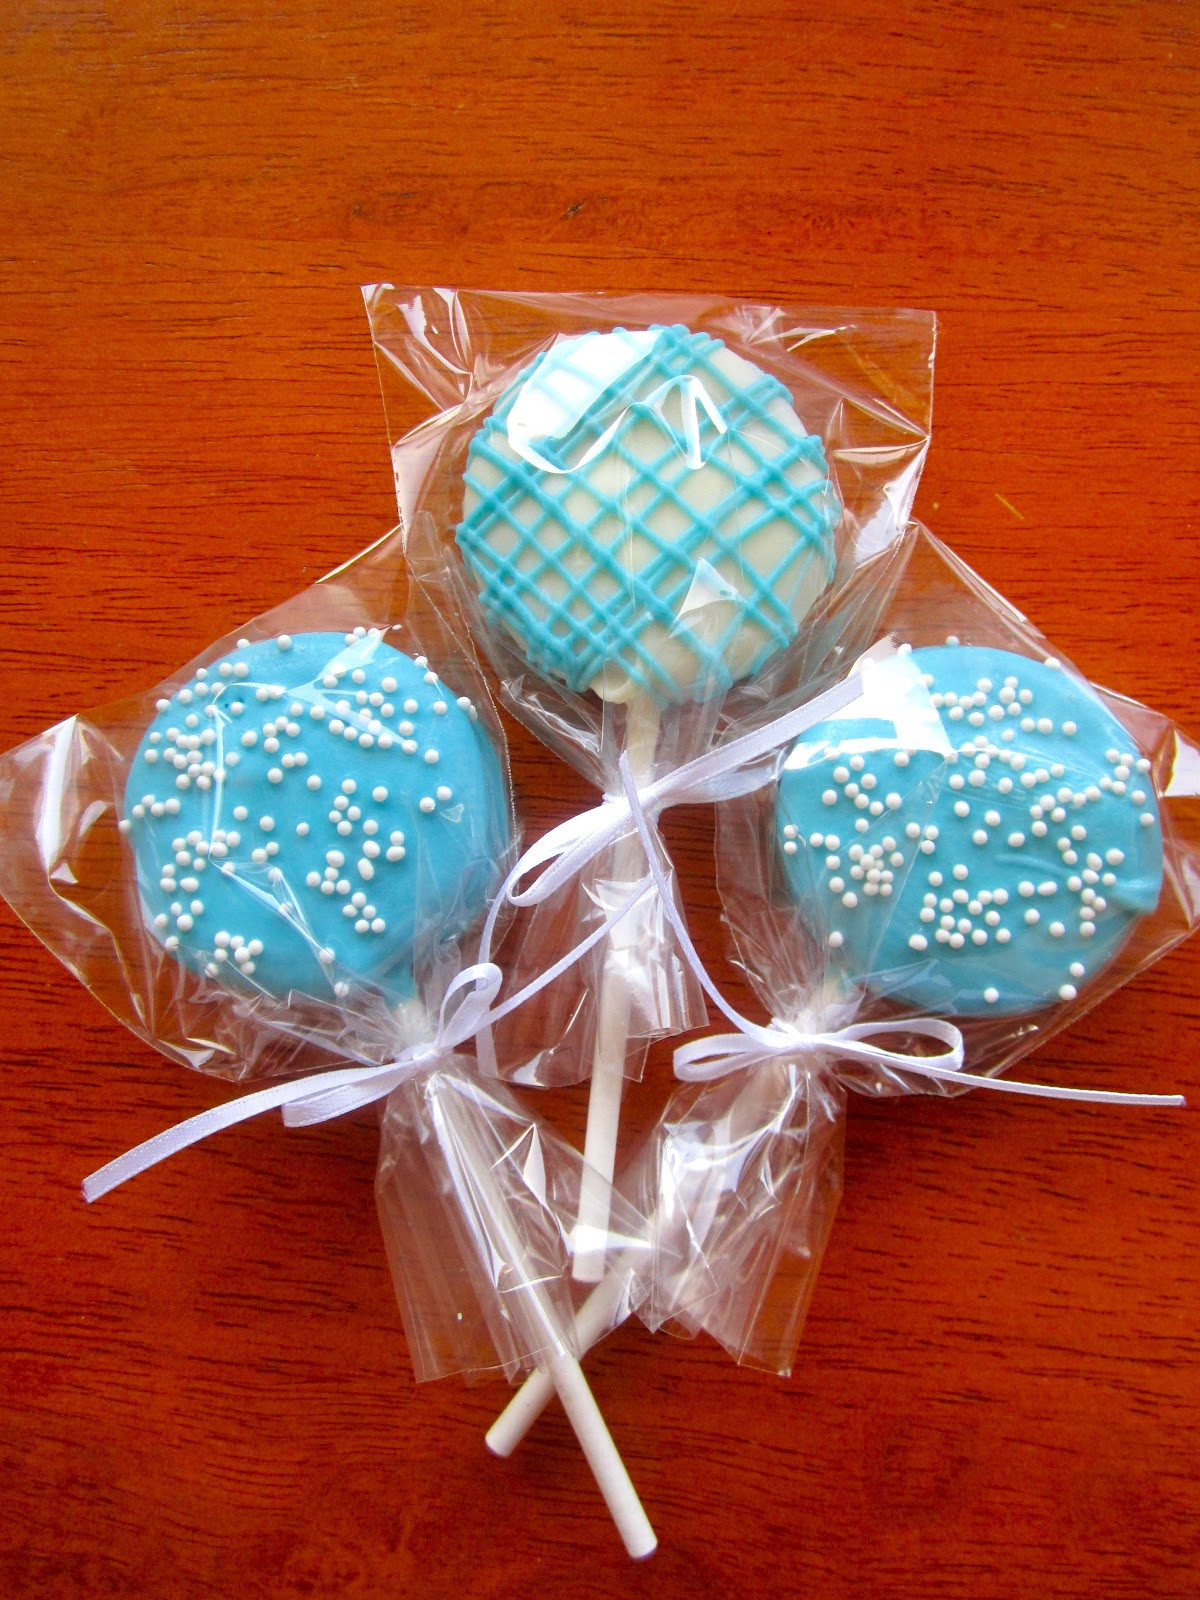 Baby Shower Party Favors Ideas DIY
 25 DIY Baby Shower Favors